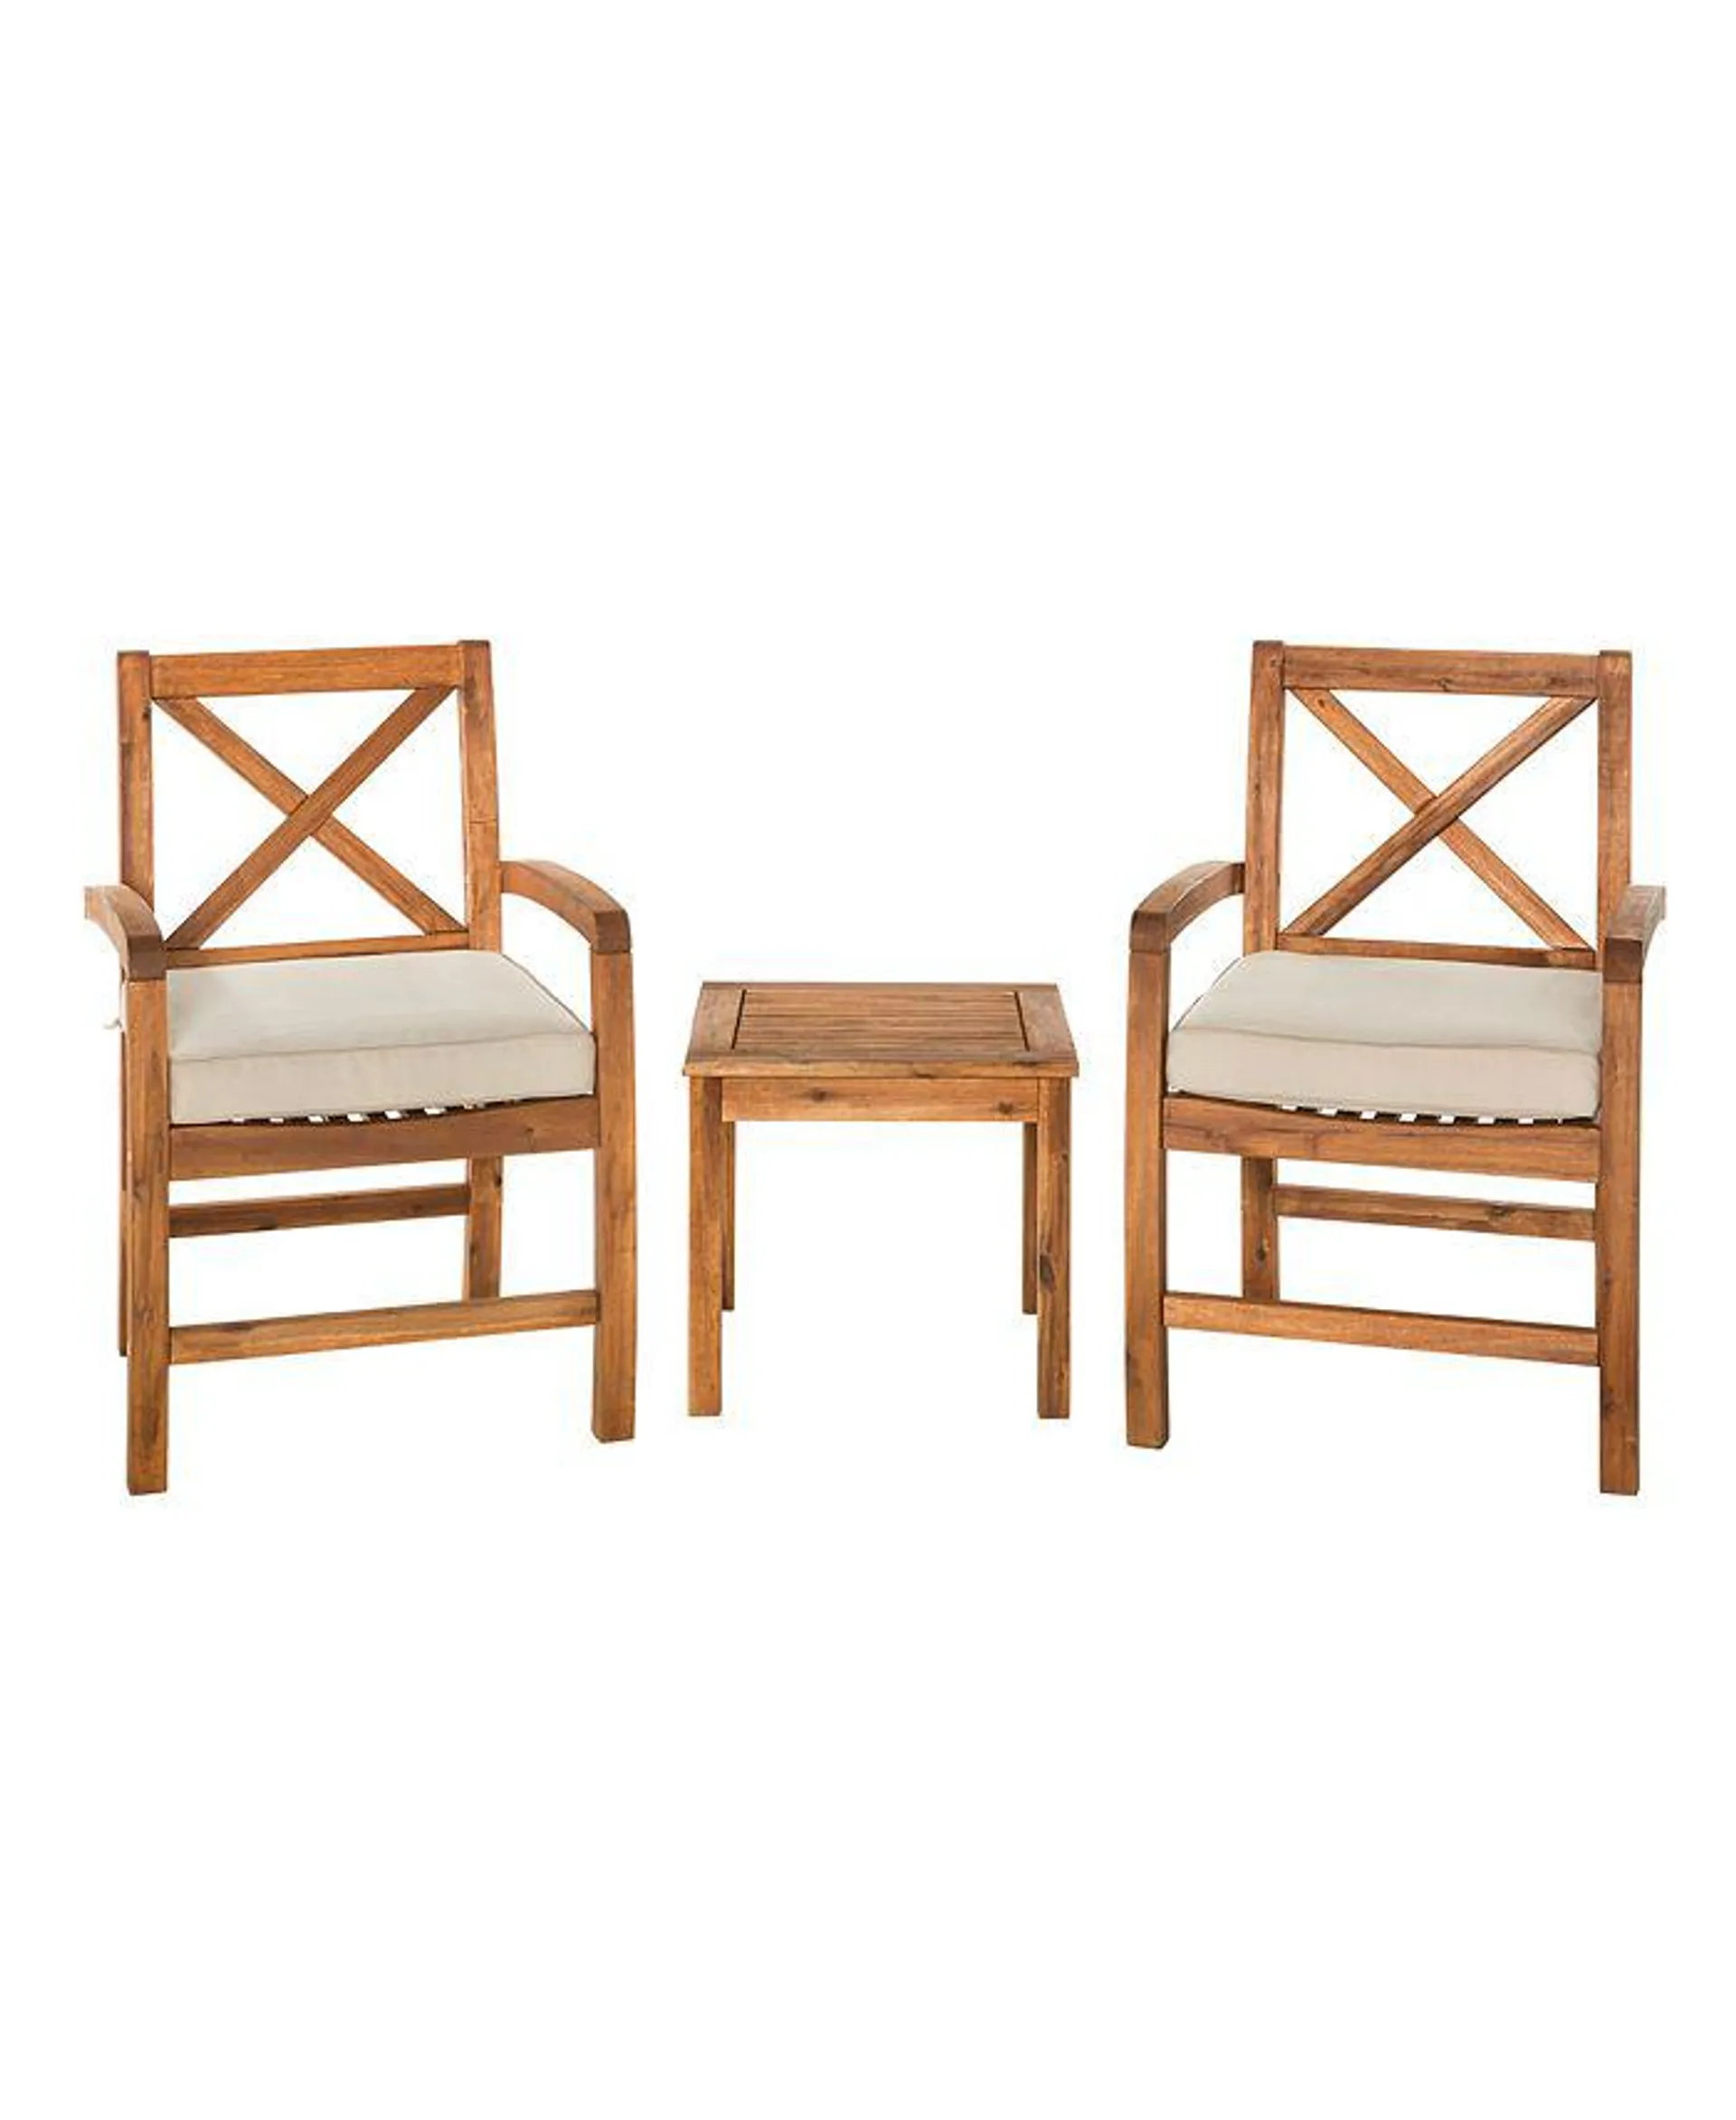 Acacia Wood Patio Chairs with X-Design and Side Table - Brown